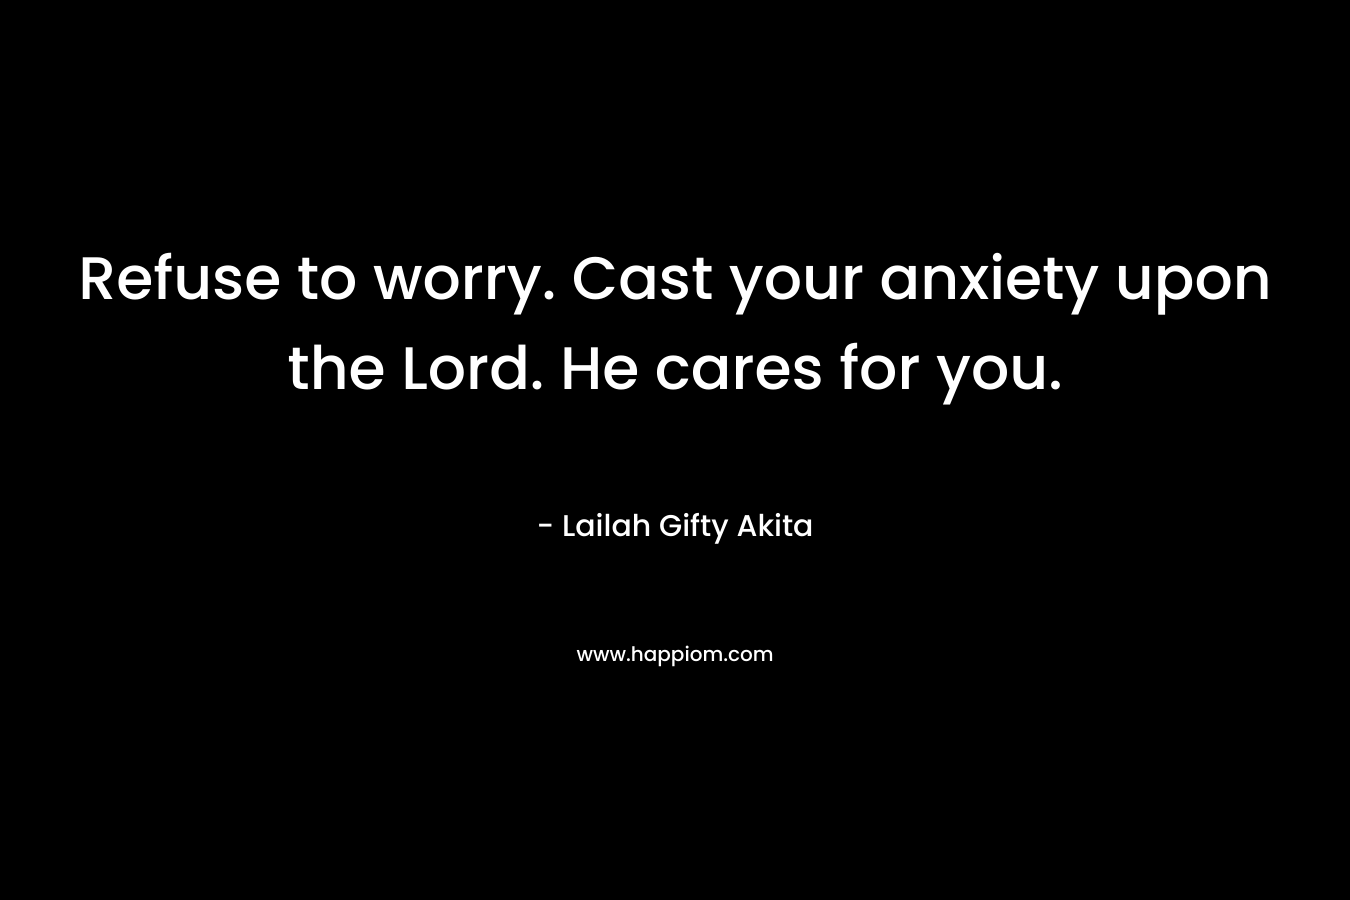 Refuse to worry. Cast your anxiety upon the Lord. He cares for you.